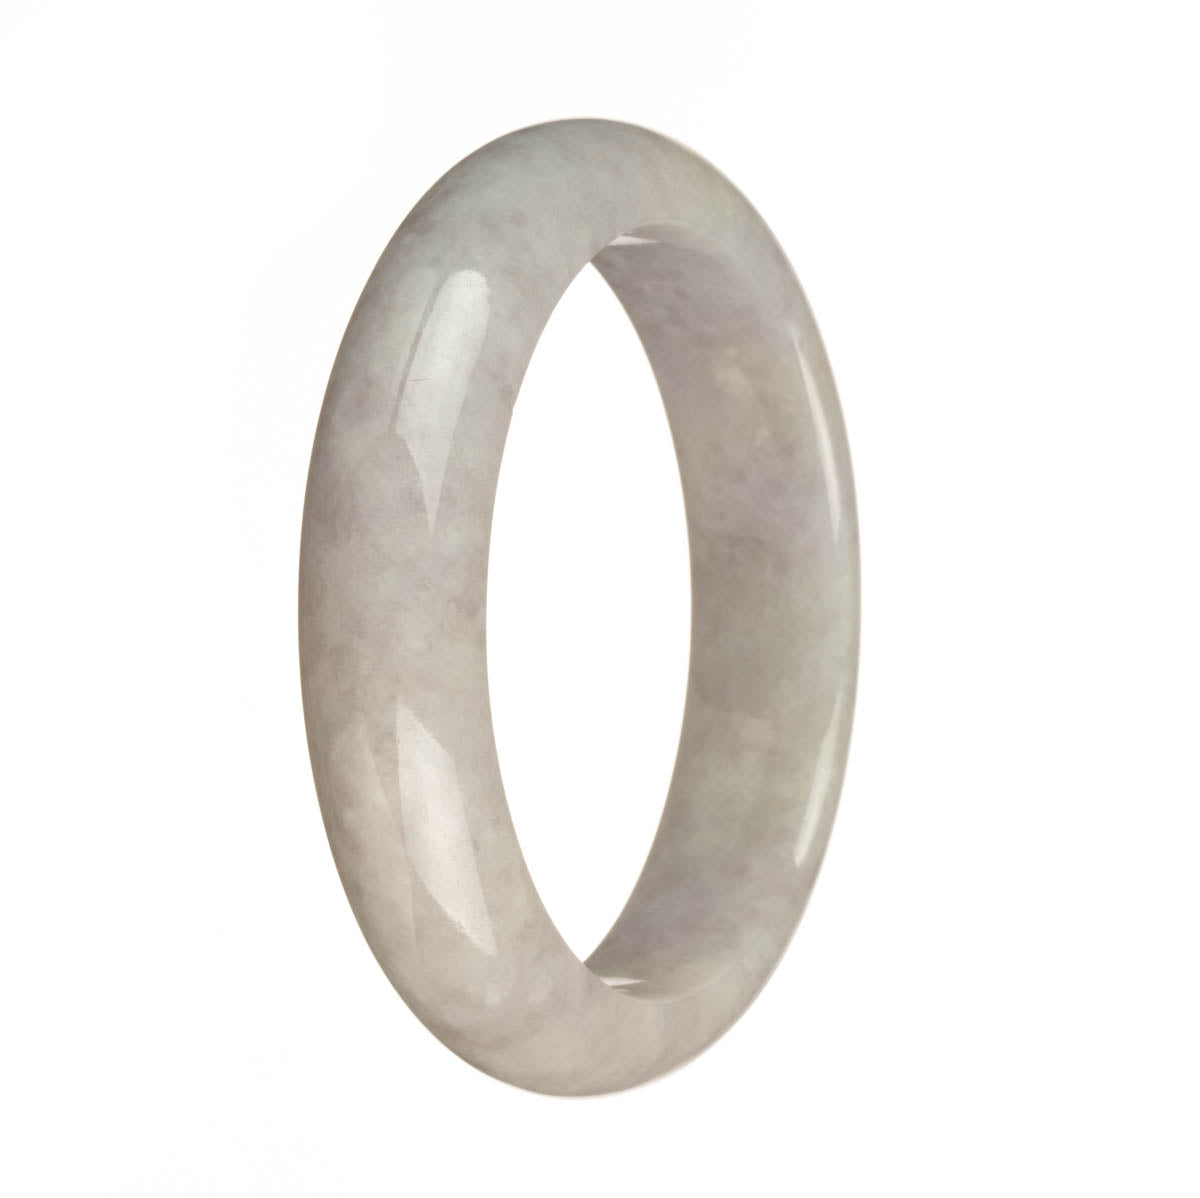 A lavender Burma jade bangle with a half moon shape, crafted from real natural materials.